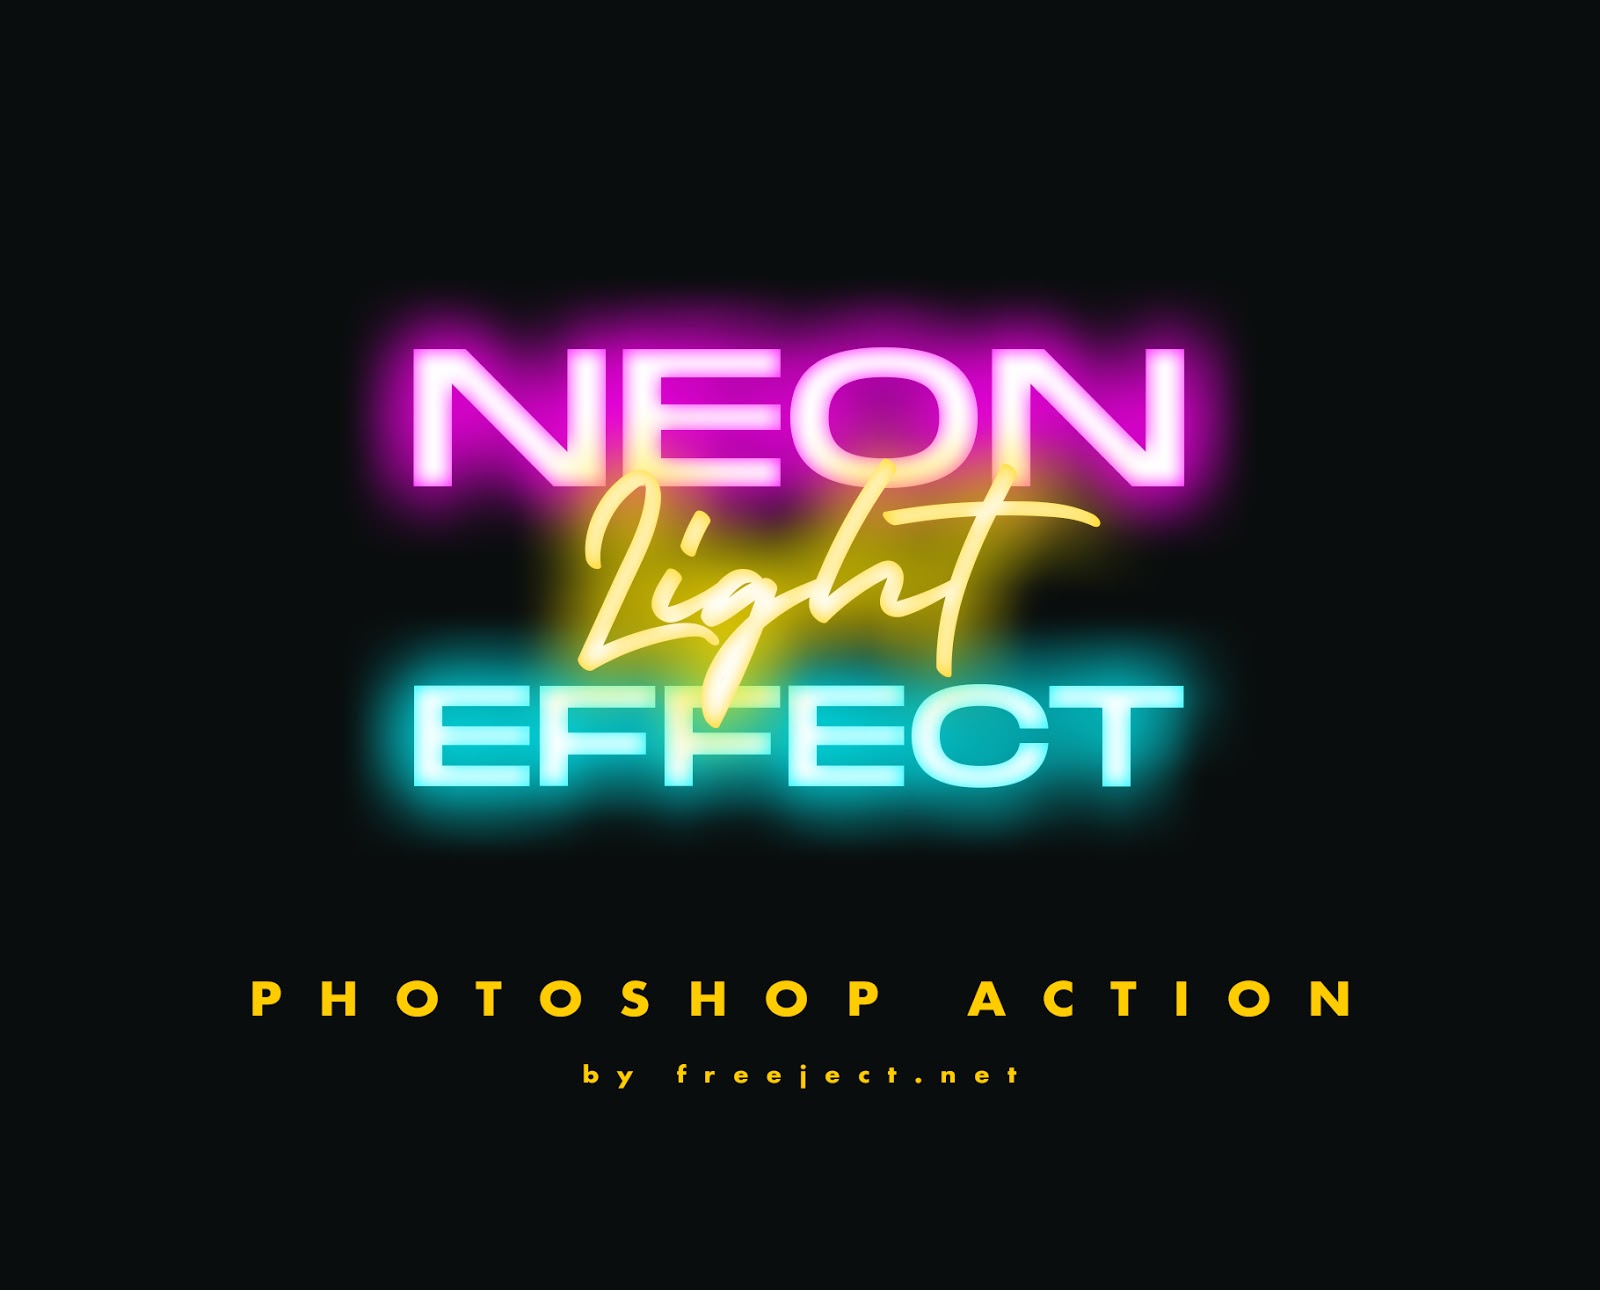 Free Download Neon Text Effect Photoshop Action